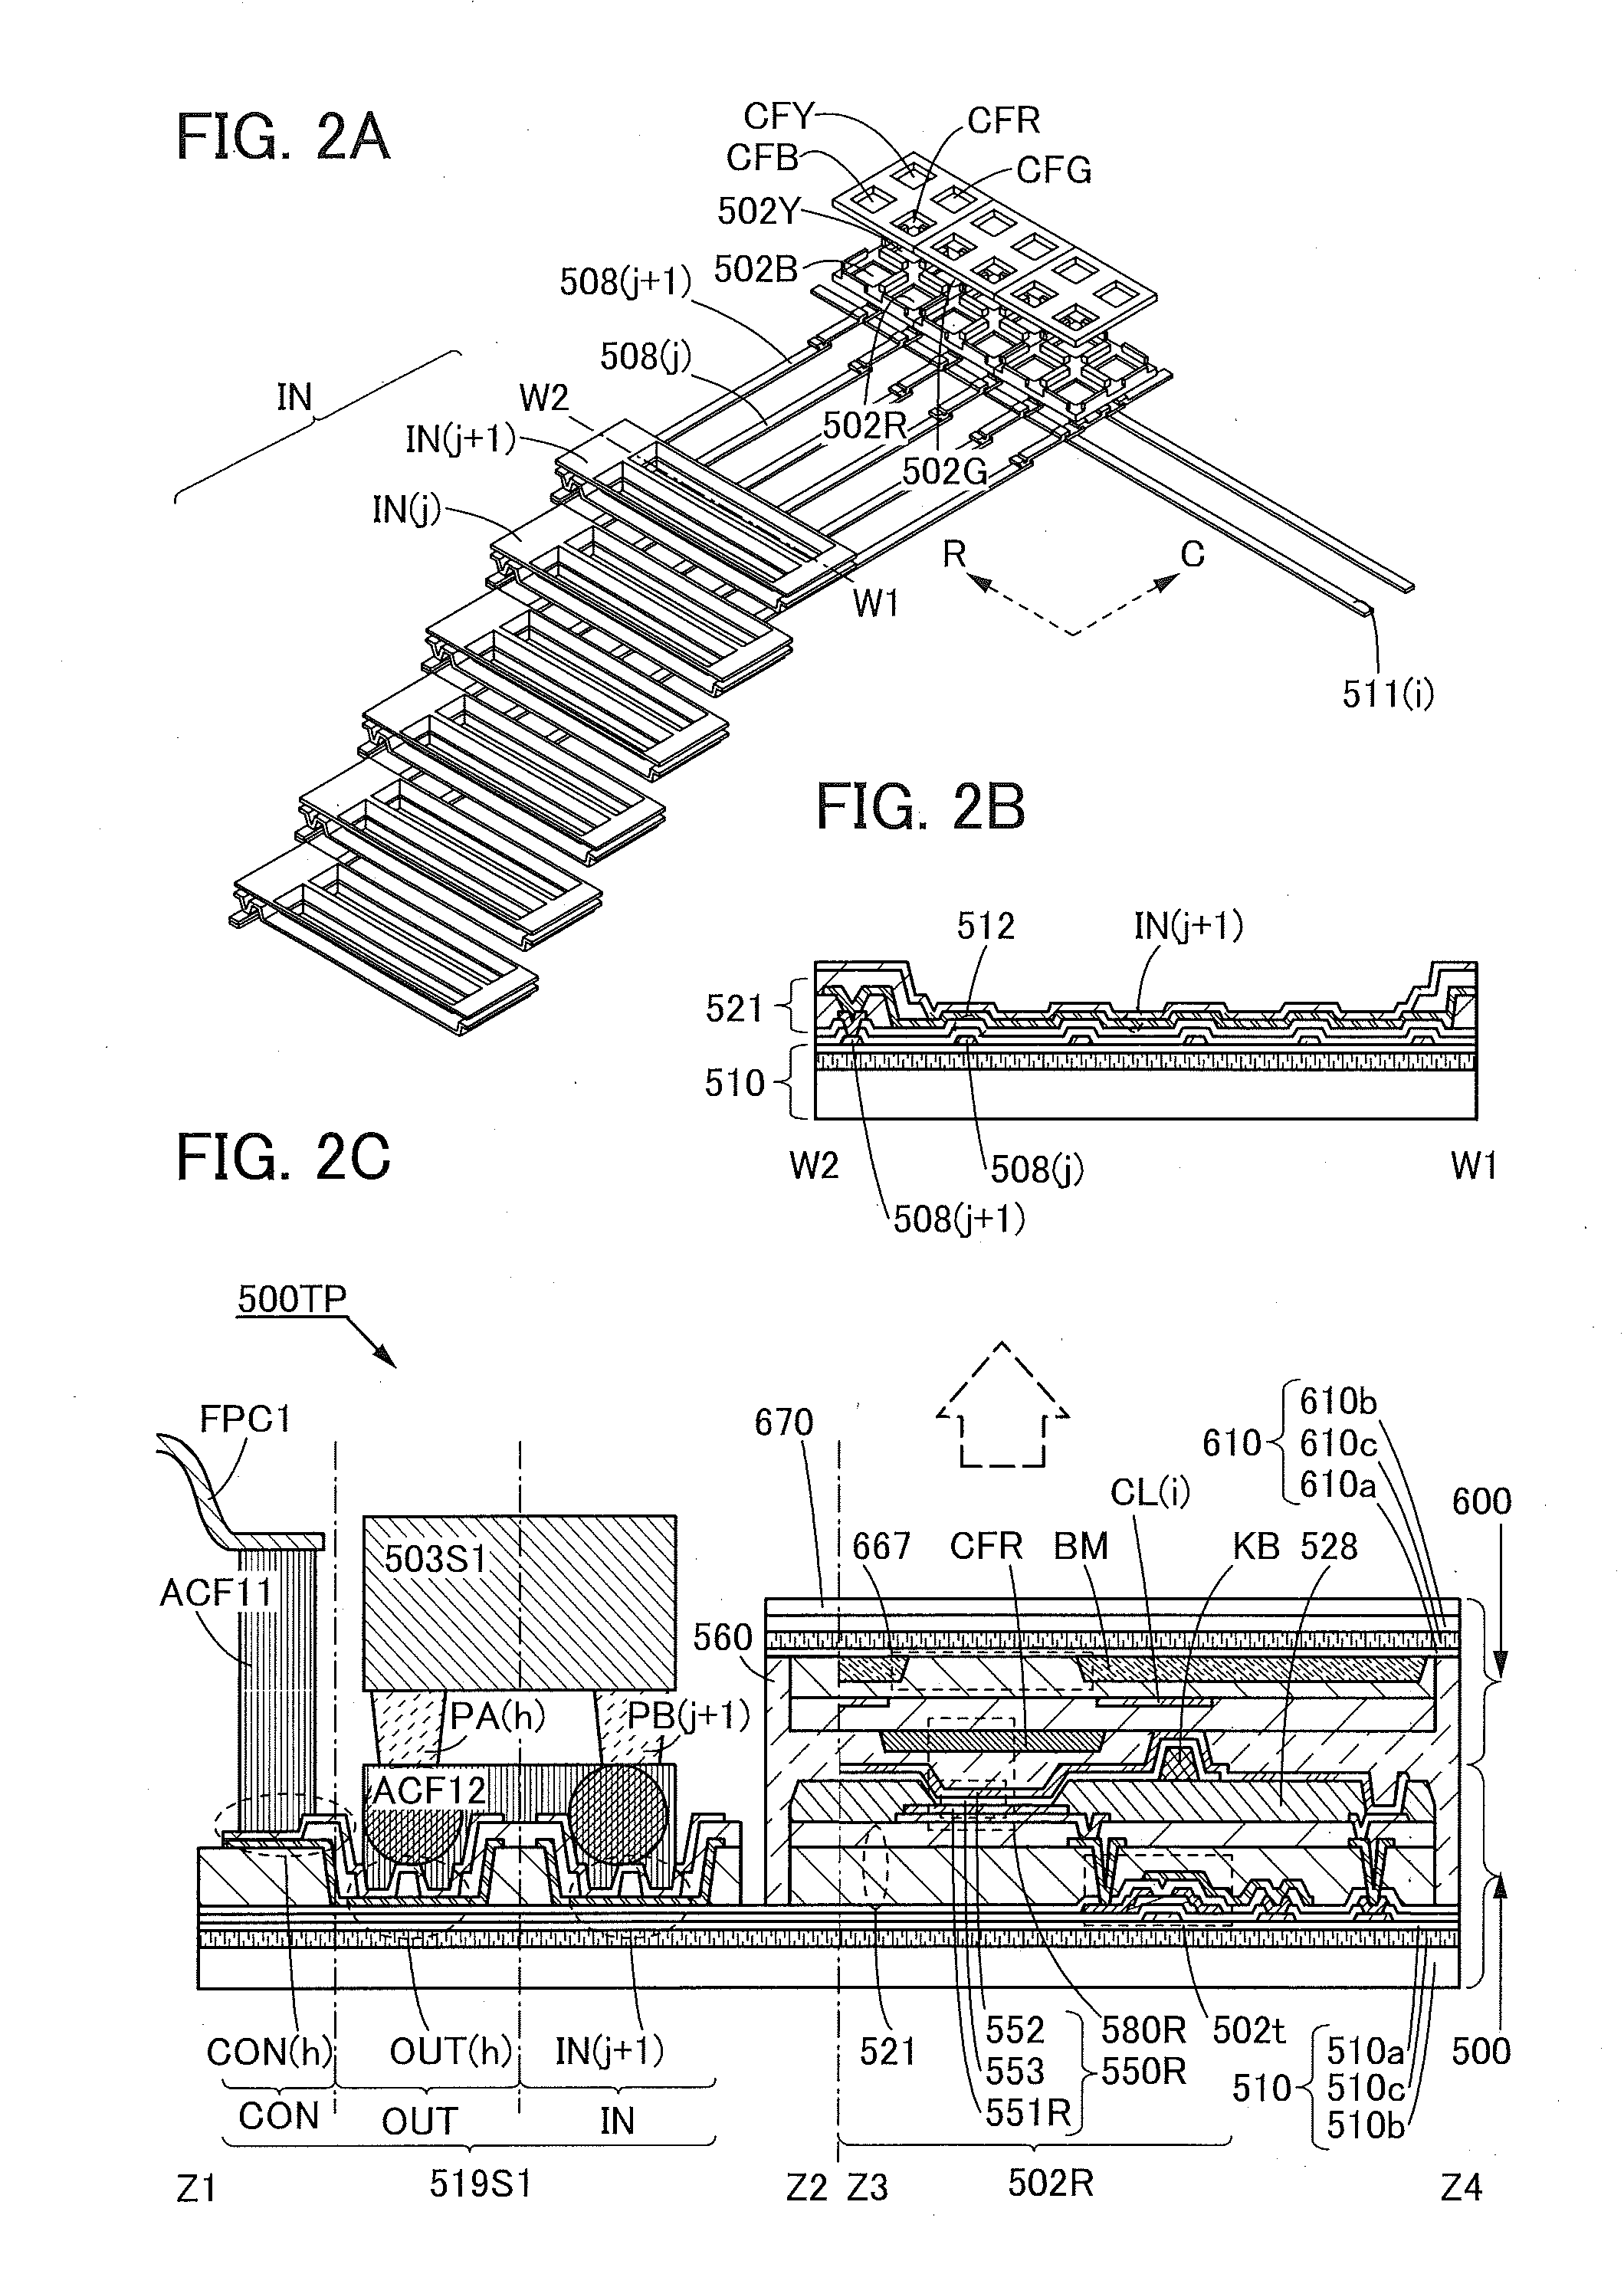 Display Panel, Input/output Device, and Data Processor